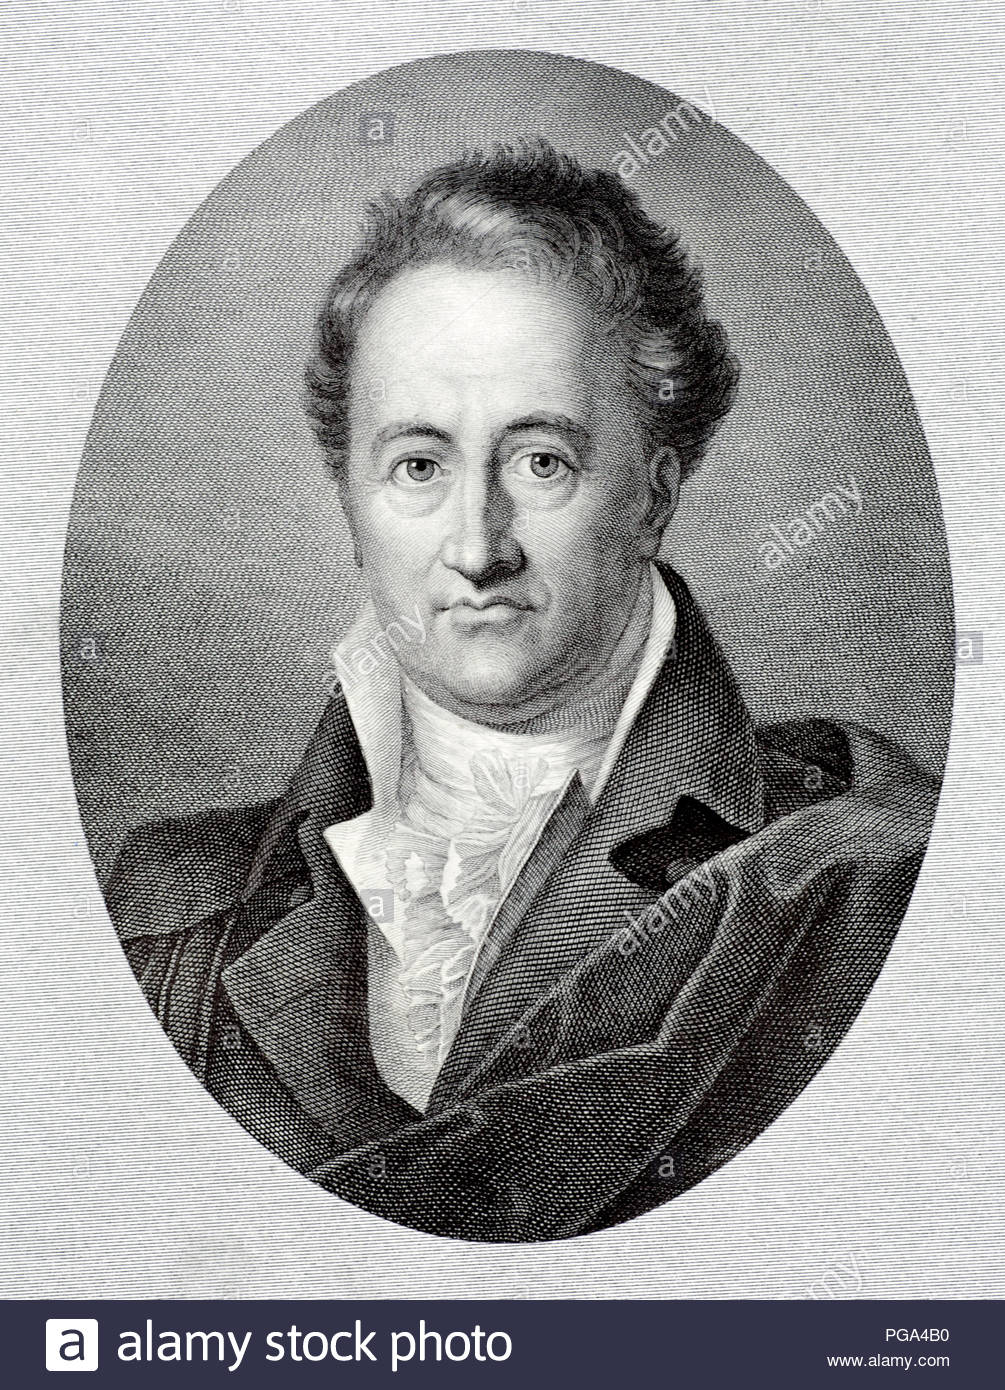 Johann Wolfgang von Goethe portrait 1749 – 1832 was a German writer and statesman. His works include four novels; epic and lyric poetry; prose and verse dramas; memoirs; an autobiography; literary and aesthetic criticism; and treatises on botany, anatomy, antique illustration from 1880 Stock Photo